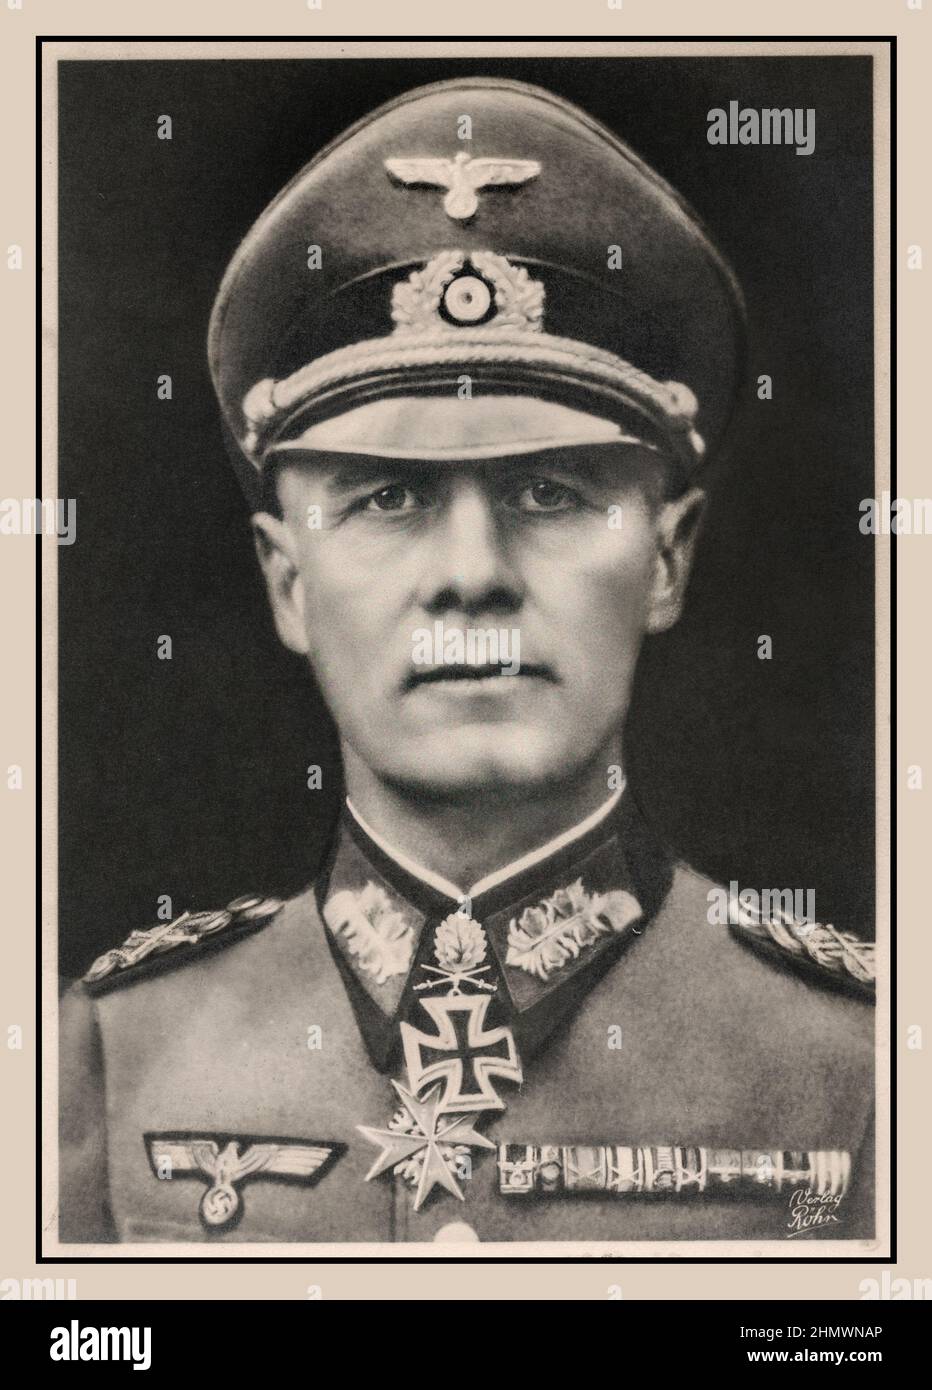 ROMMEL Formal Portrait of Erwin Rommel 1940's  German General Field Marshall and military theorist. Popularly known as the Desert Fox, he served as field marshal in the Wehrmacht of Nazi Germany during World War II. Rommel was a highly decorated officer in World War I and was awarded the Pour le Mérite for his actions on the Italian Front. Subsequent Knight's Cross of the Iron Cross with Oak Leaves medal in WW2  An old school respected Army Field Marshall who could see the huge irrational & criminal shortcomings in Adolf Hitler and supported the attempted assassination which sealed his fate. Stock Photo